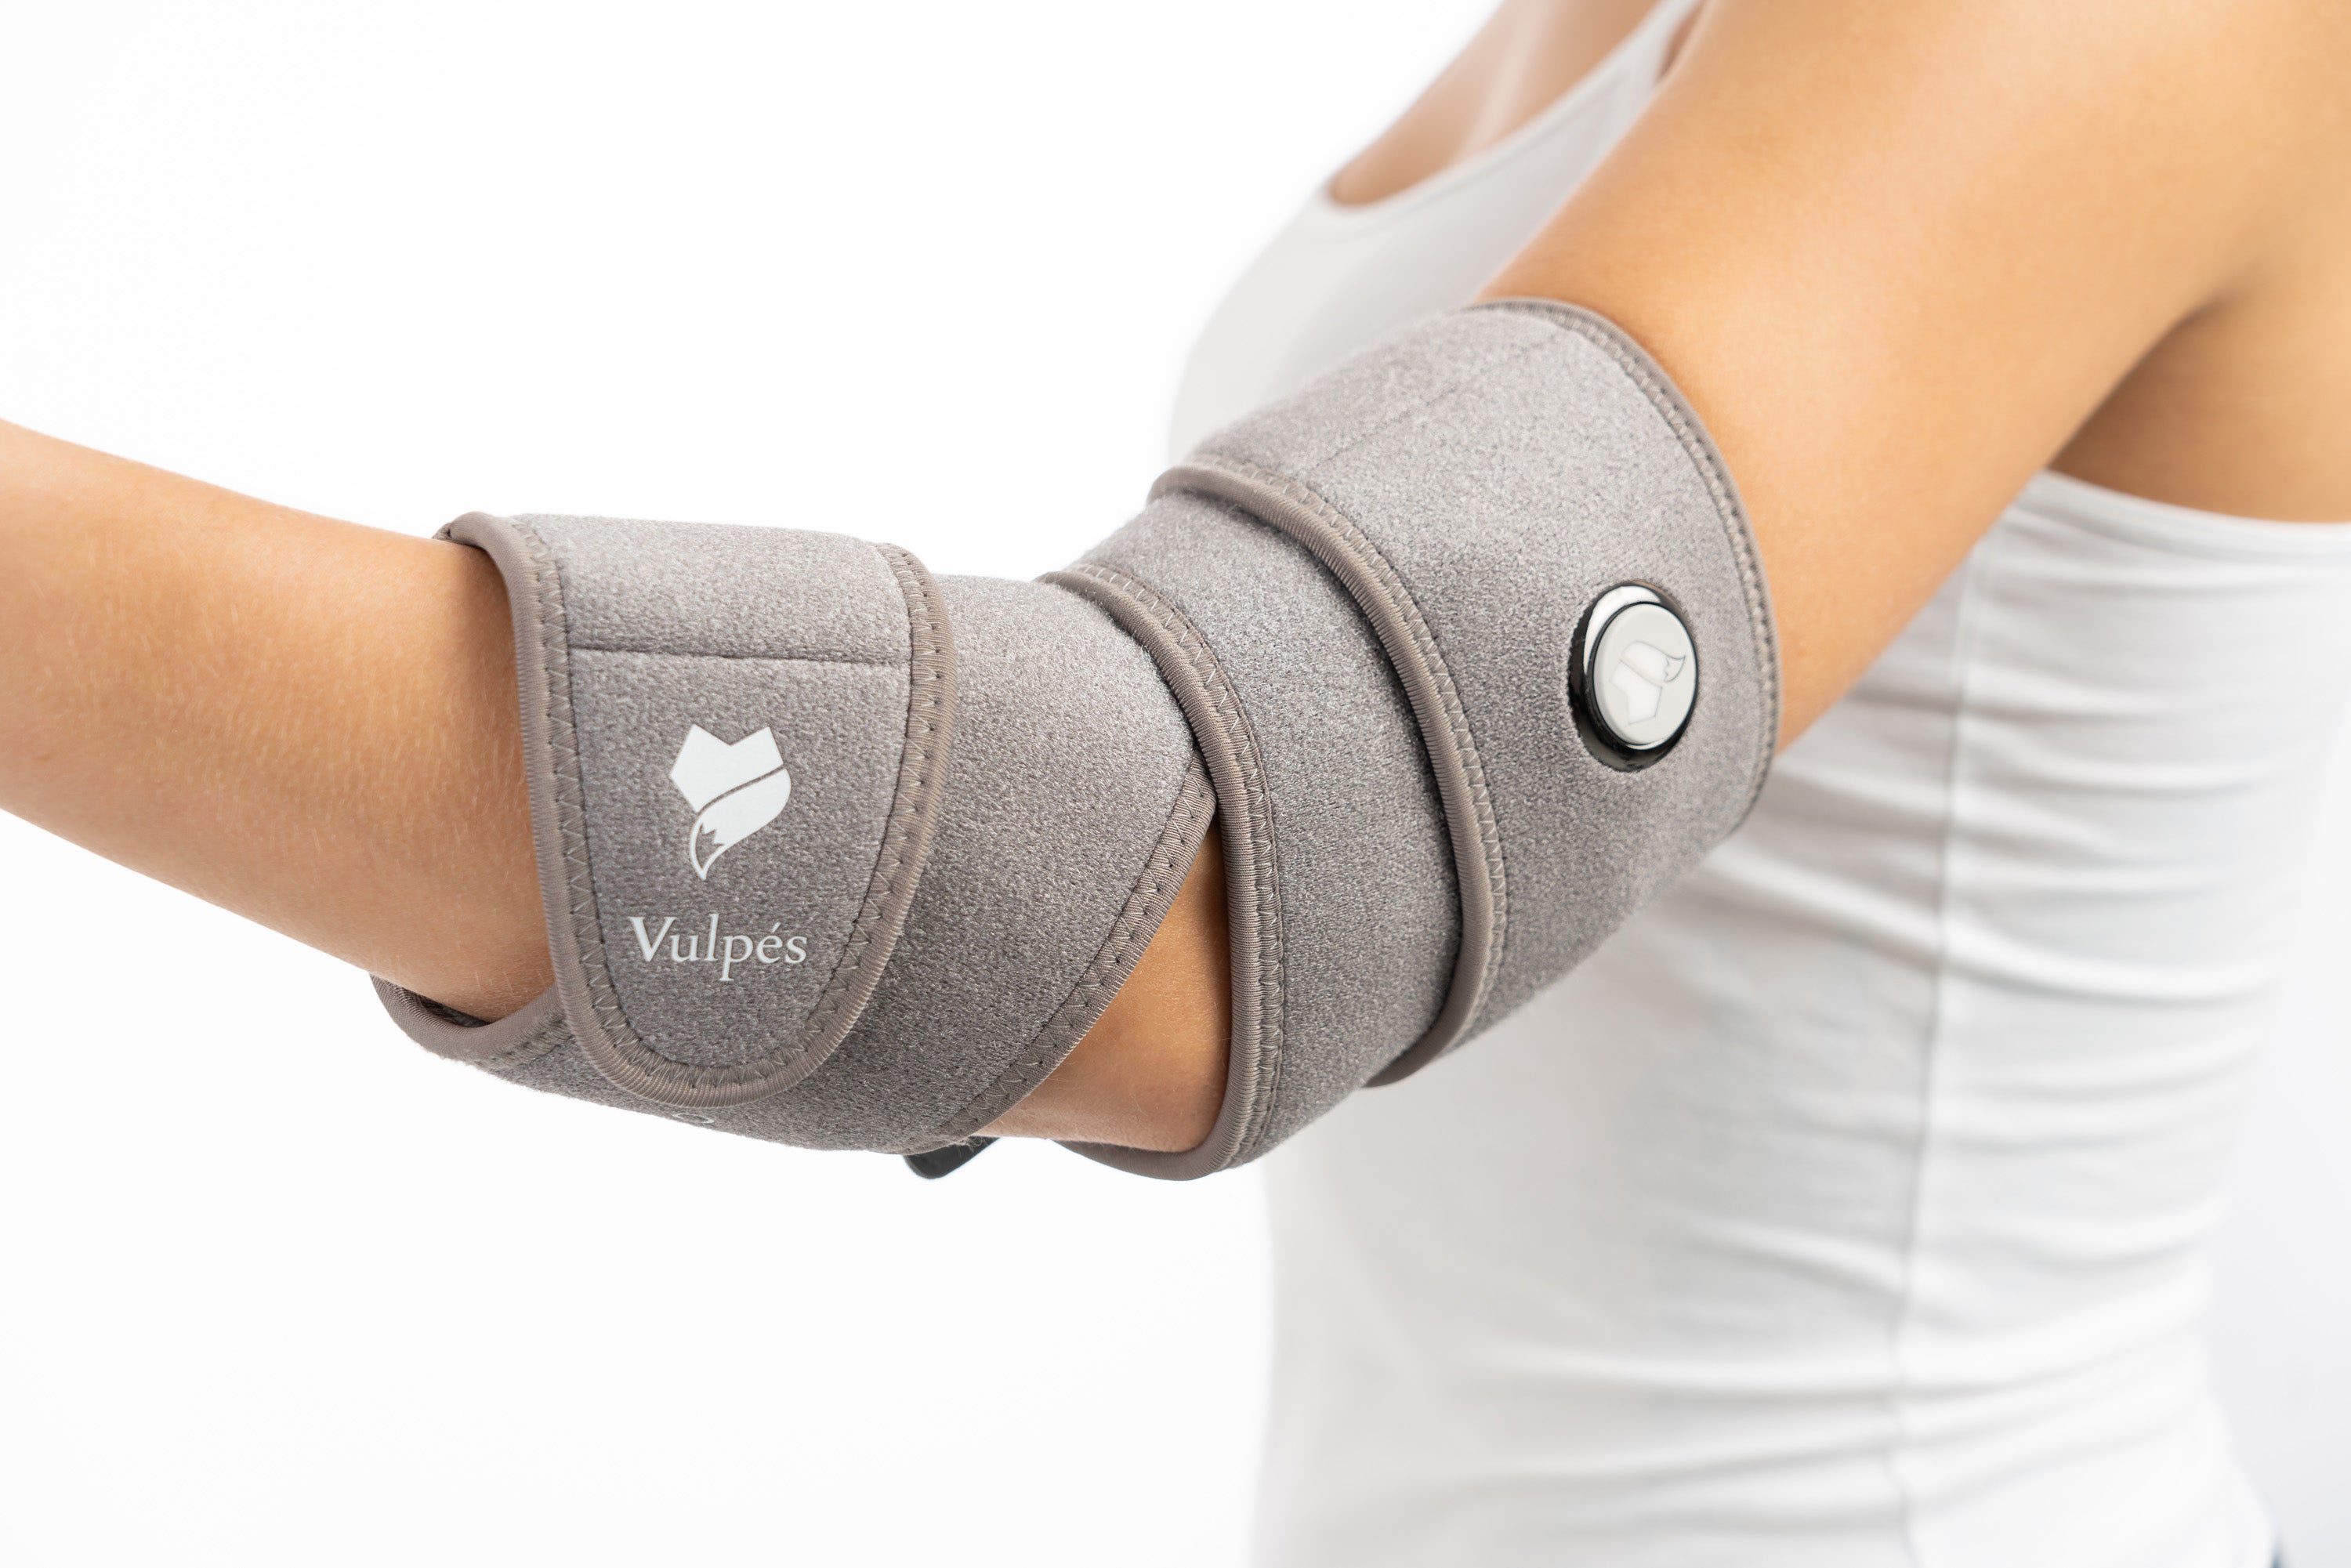 Beyond Pain Relief: Unveiling the Full Range of Heated Recovery Brace Benefits